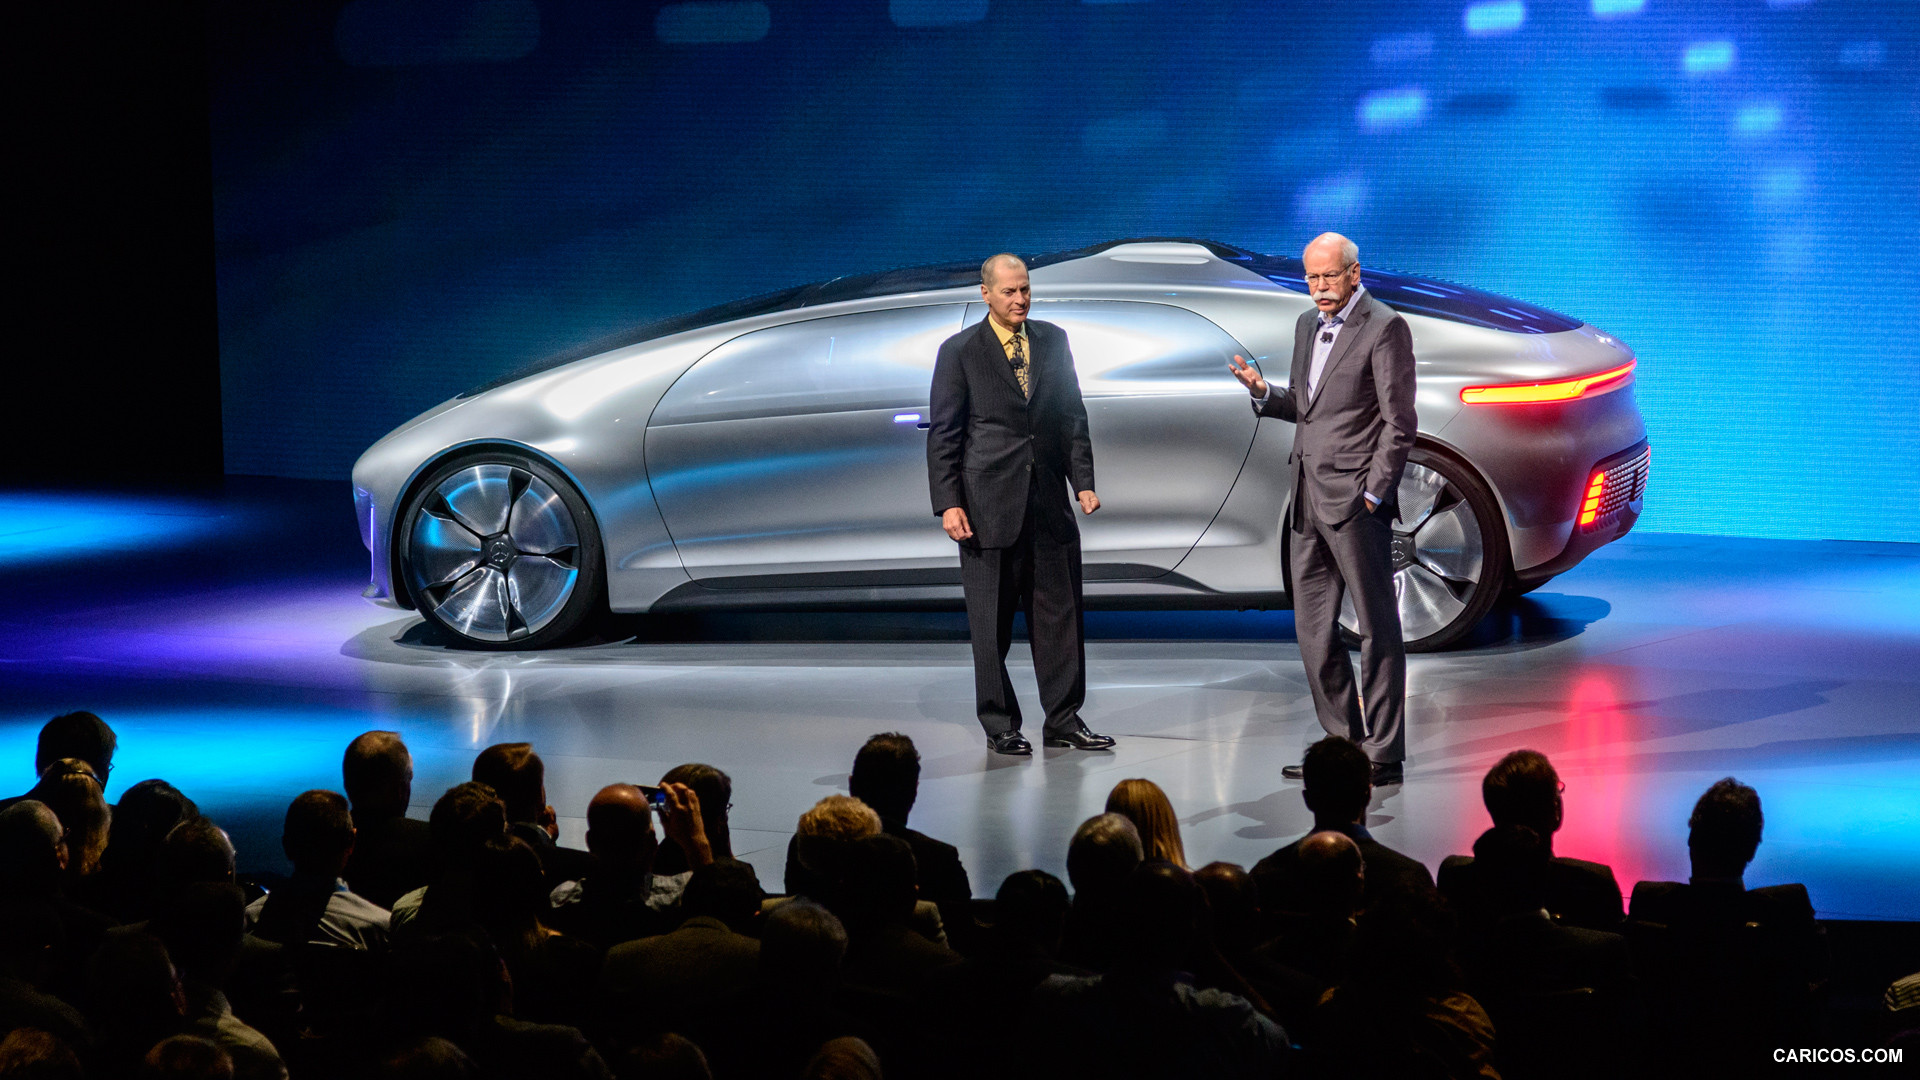 2015 Mercedes-Benz F 015 Luxury in Motion Concept at CES - Side, #88 of 92